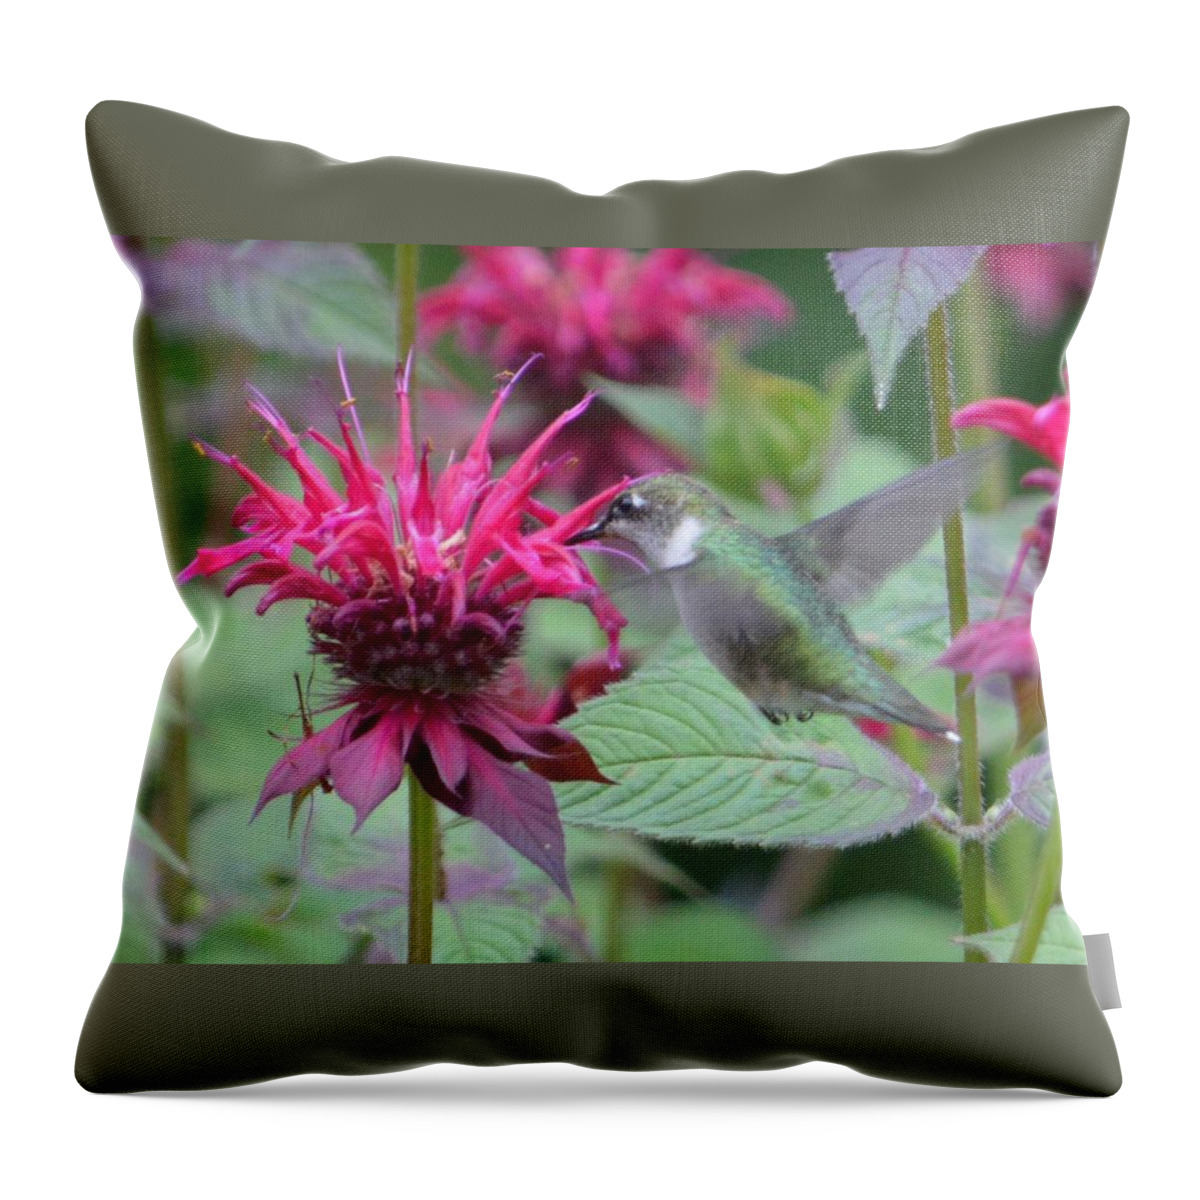 Leaves Throw Pillow featuring the photograph The Hummingbird Leaf by Lena Hatch